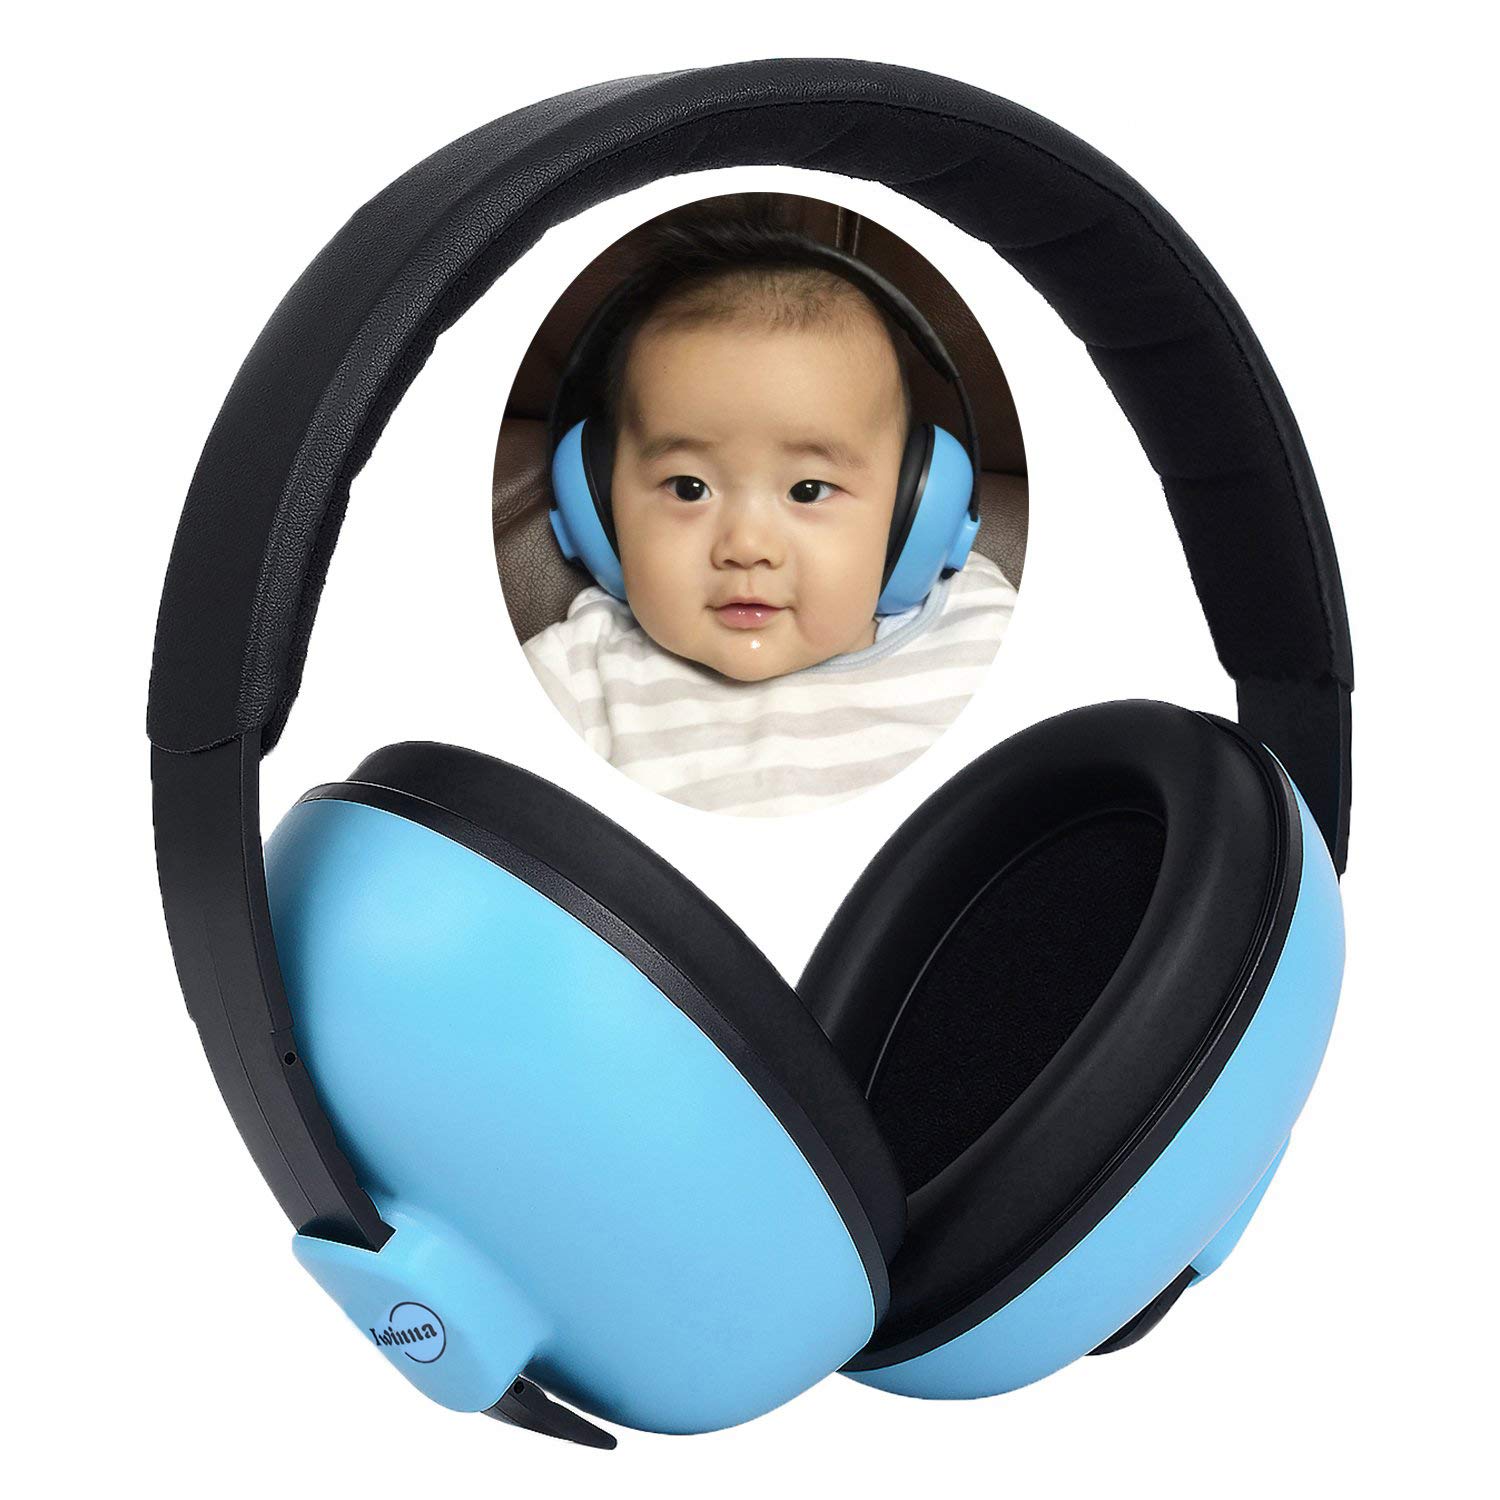 Baby Headphones Safety Ear Muffs Noise Reduction for Newborn Infant Autism Kids Toddlers Sound Cancelling Headphones for Sleeping Studying Airplane Concerts Movie Theater Fireworks, Blue